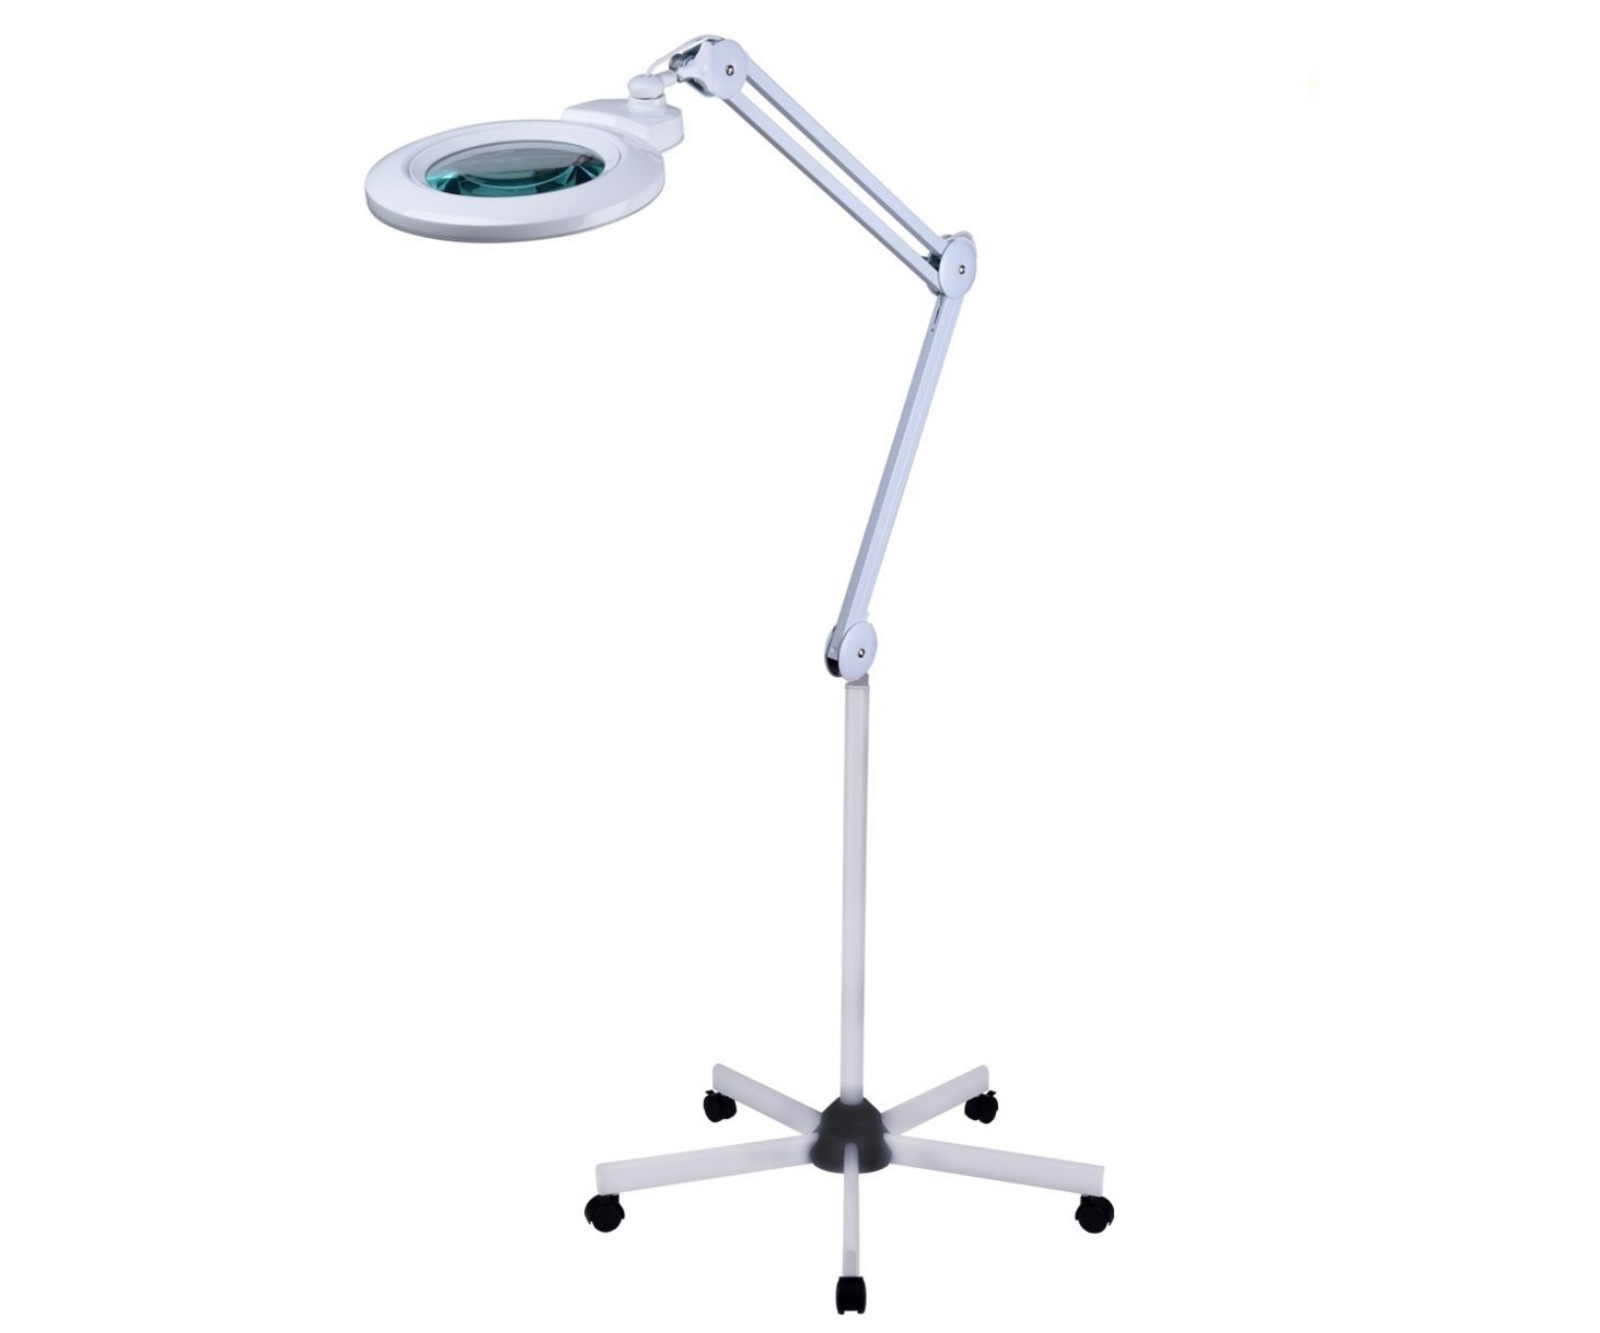 10,3W Magnifier lamp 5D with changeable lens and wheeled stand